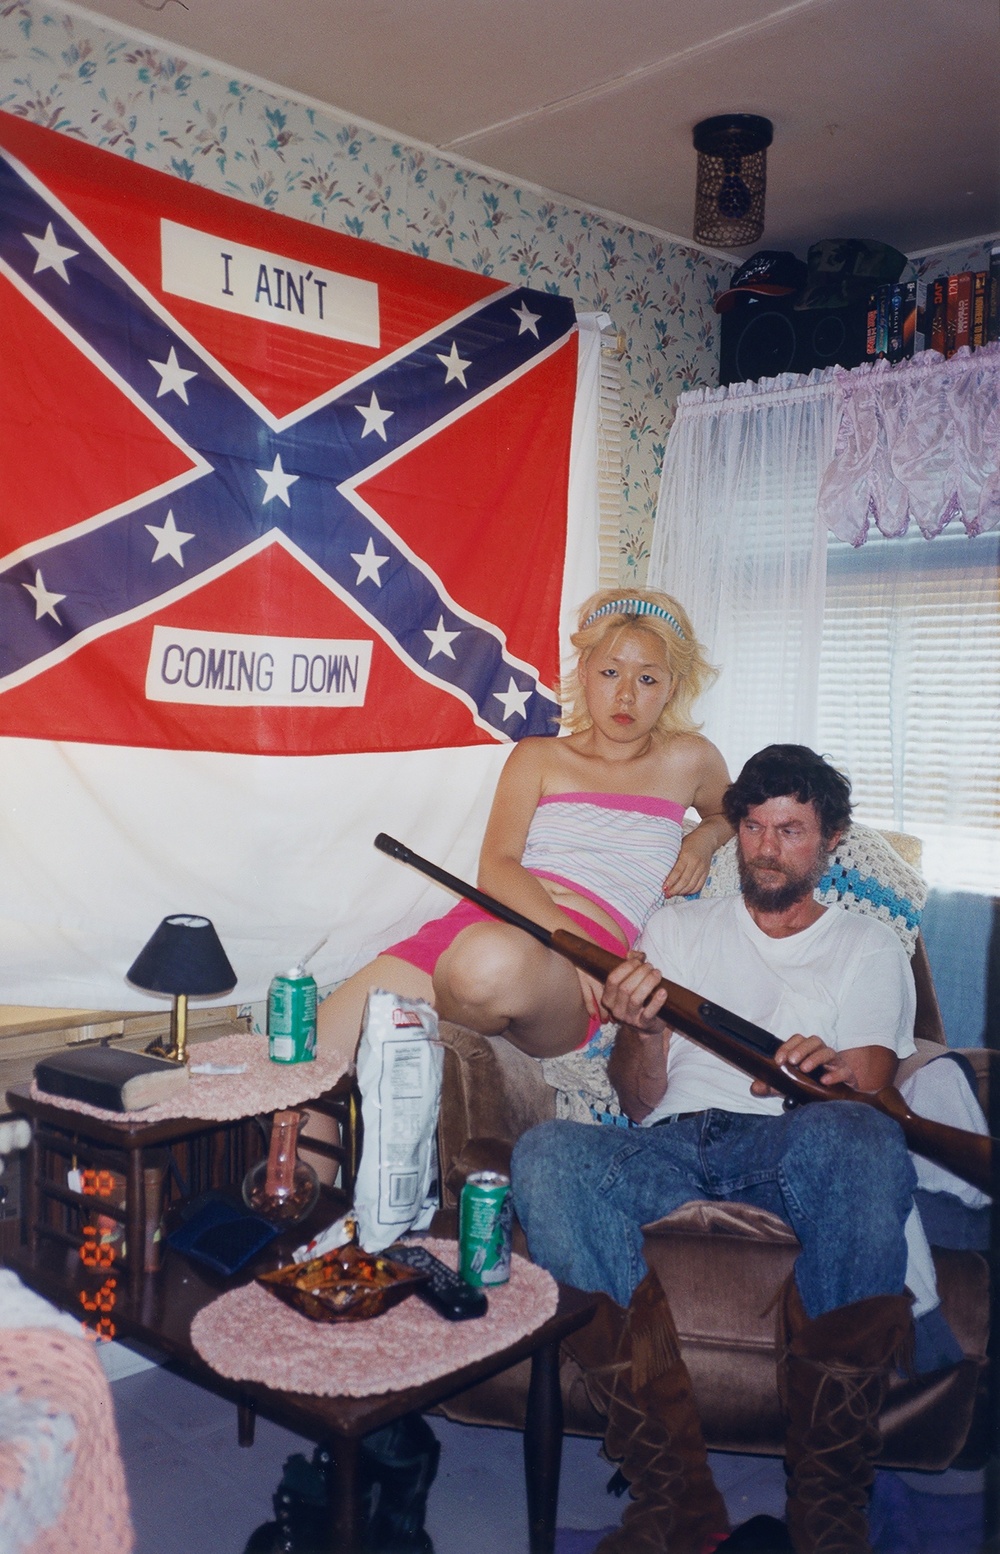 In a living room hangs a confederate flag that reads “I AIN’T COMING DOWN,” below which sits a Korean woman with dyed-blonde hair next to a white male holding a rifle. 